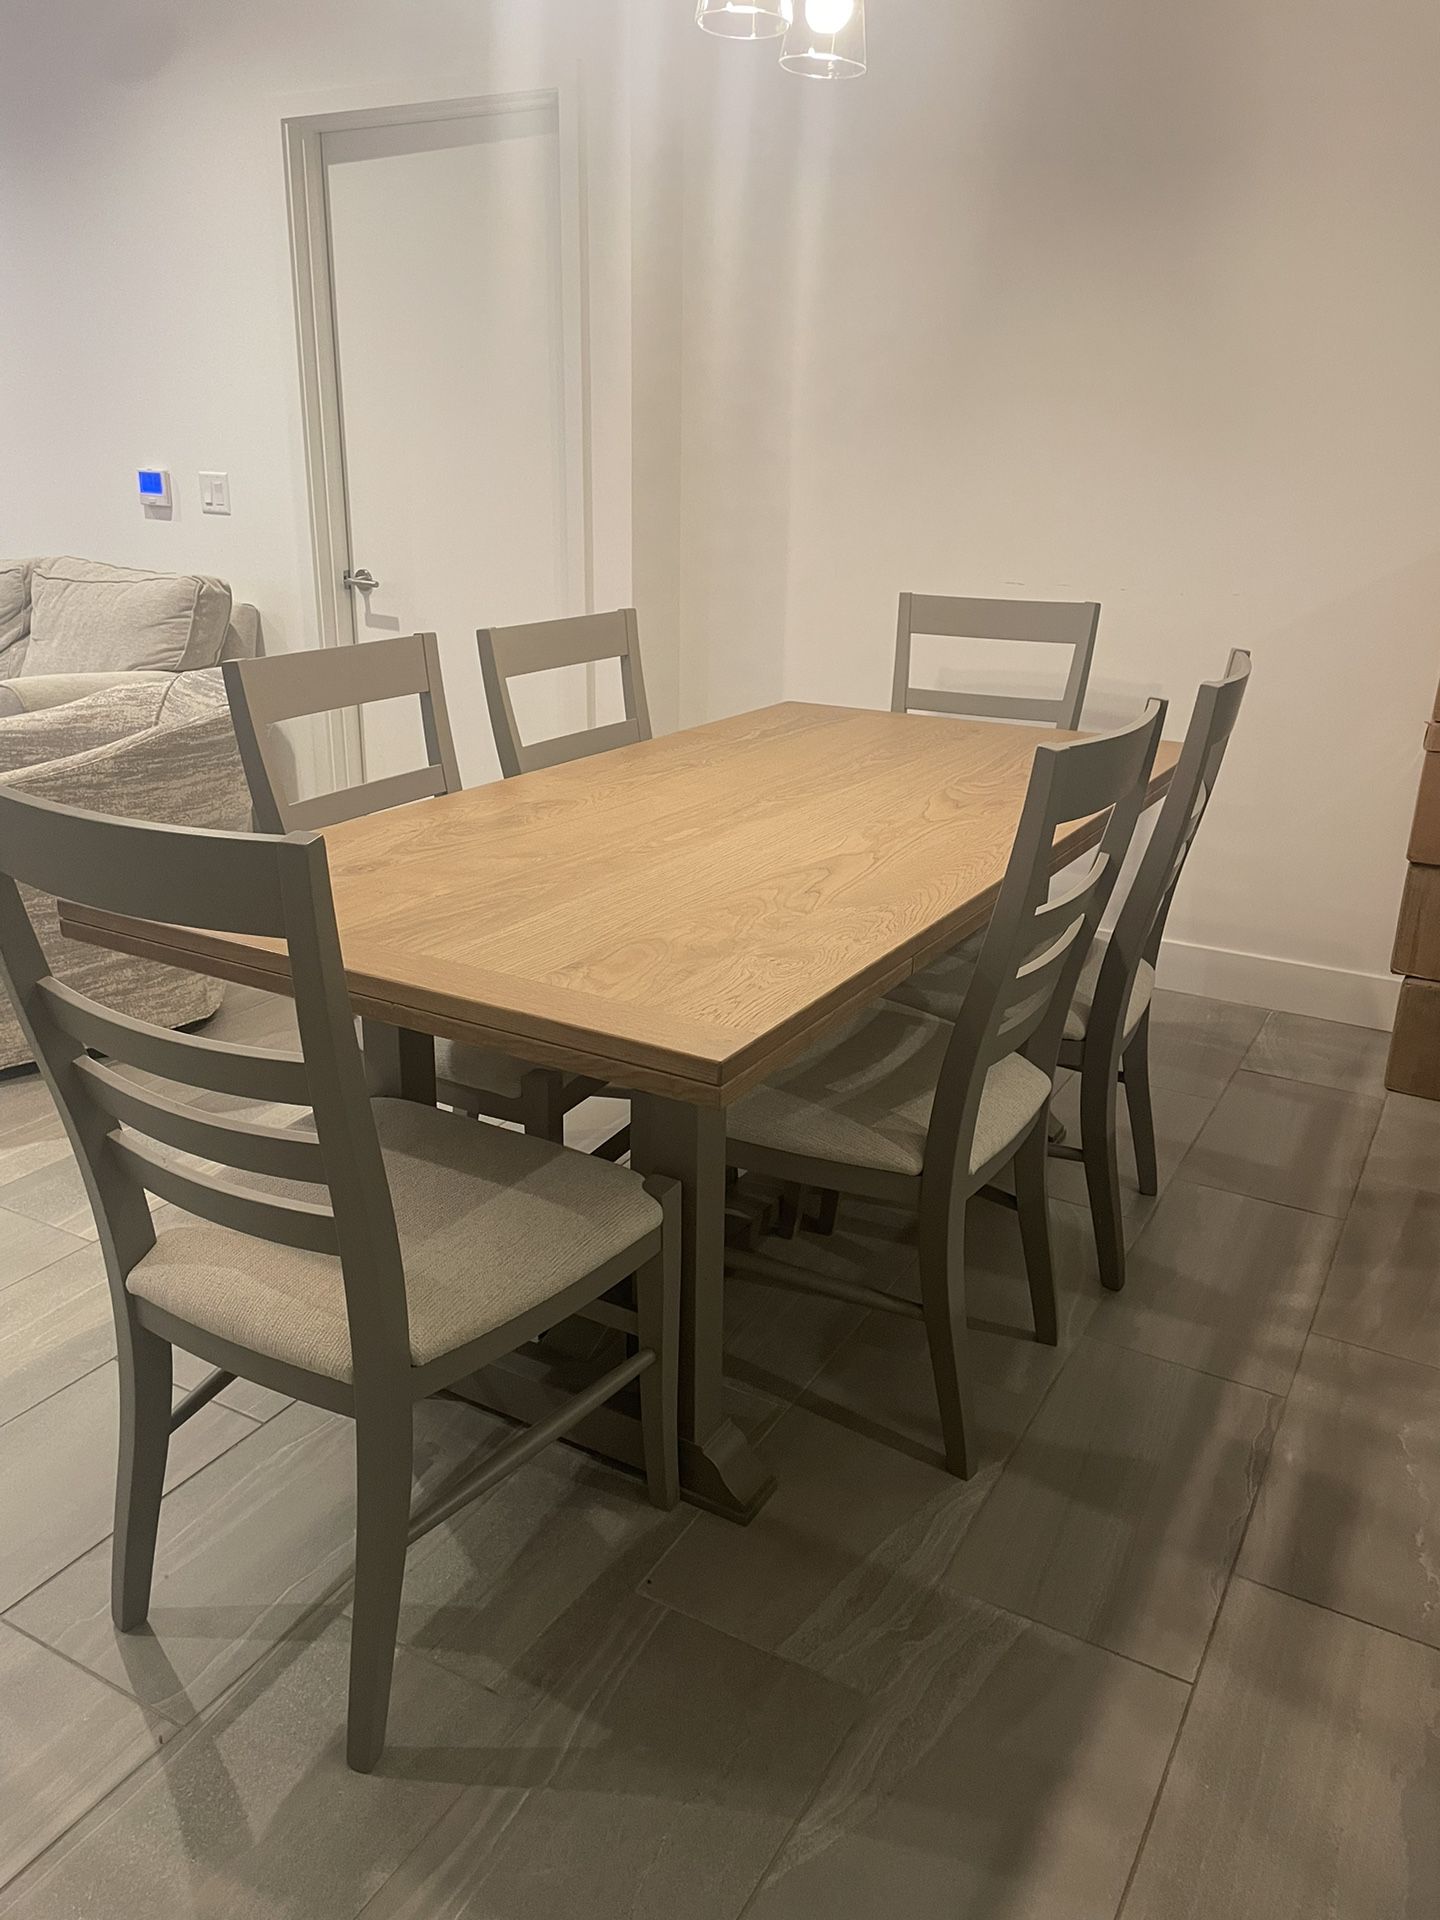 Arhaus Tavola 74" Kitchen Table W/ Grey base (extends to 108”) and 6 Arhaus Scala Dining Chairs ($4,100 new) 